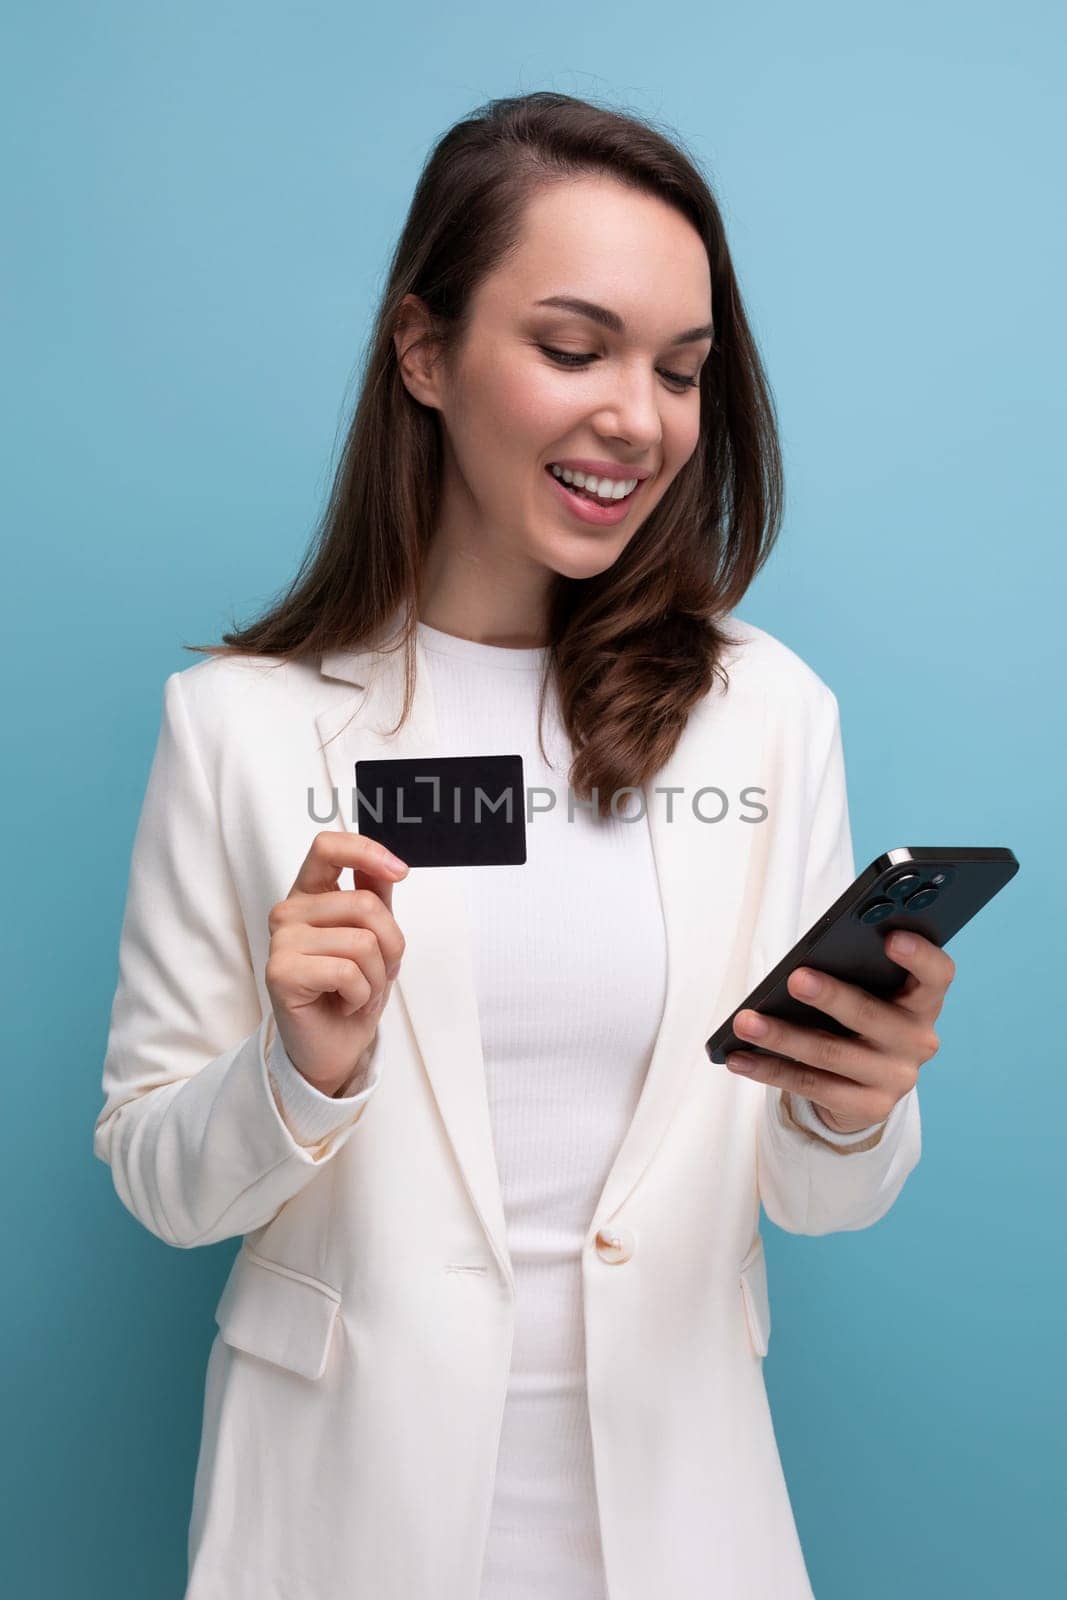 brunette woman in a dress uses electronic money transfer using a card and a smartphone.